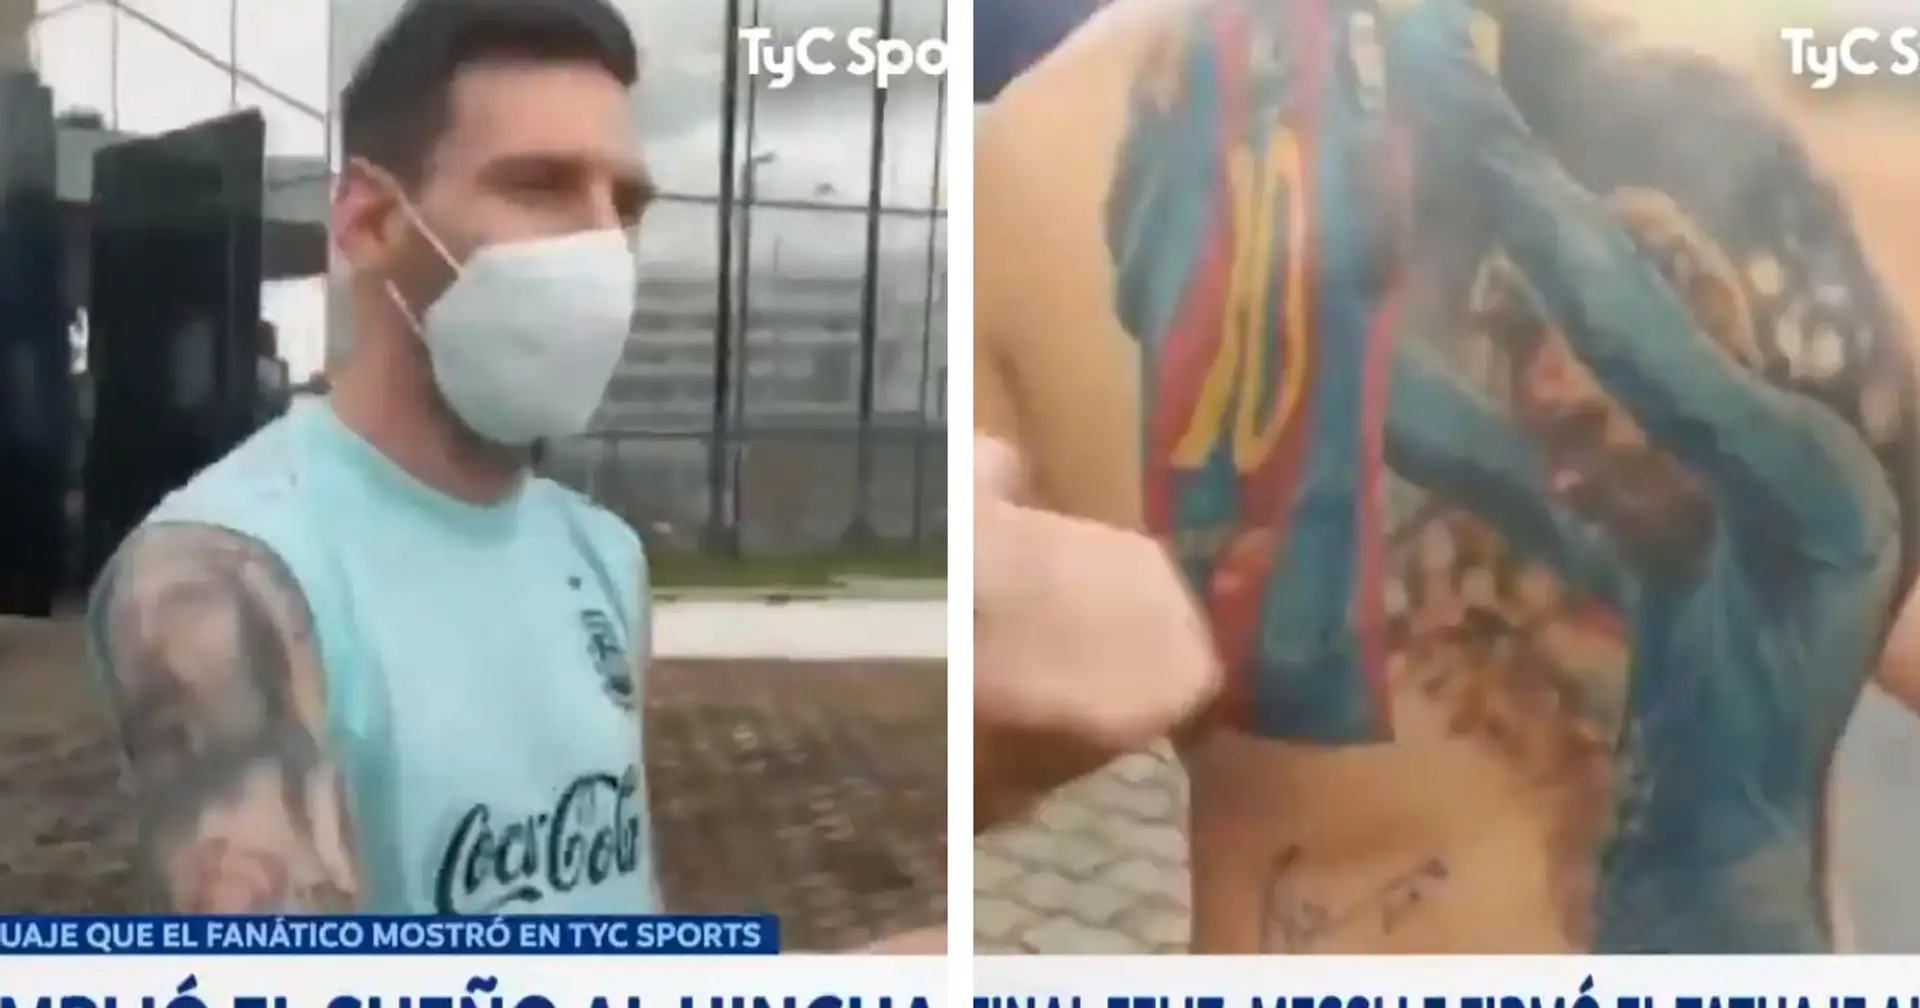 A promise is a promise: Messi signs the back of fan with huge Leo tattoo